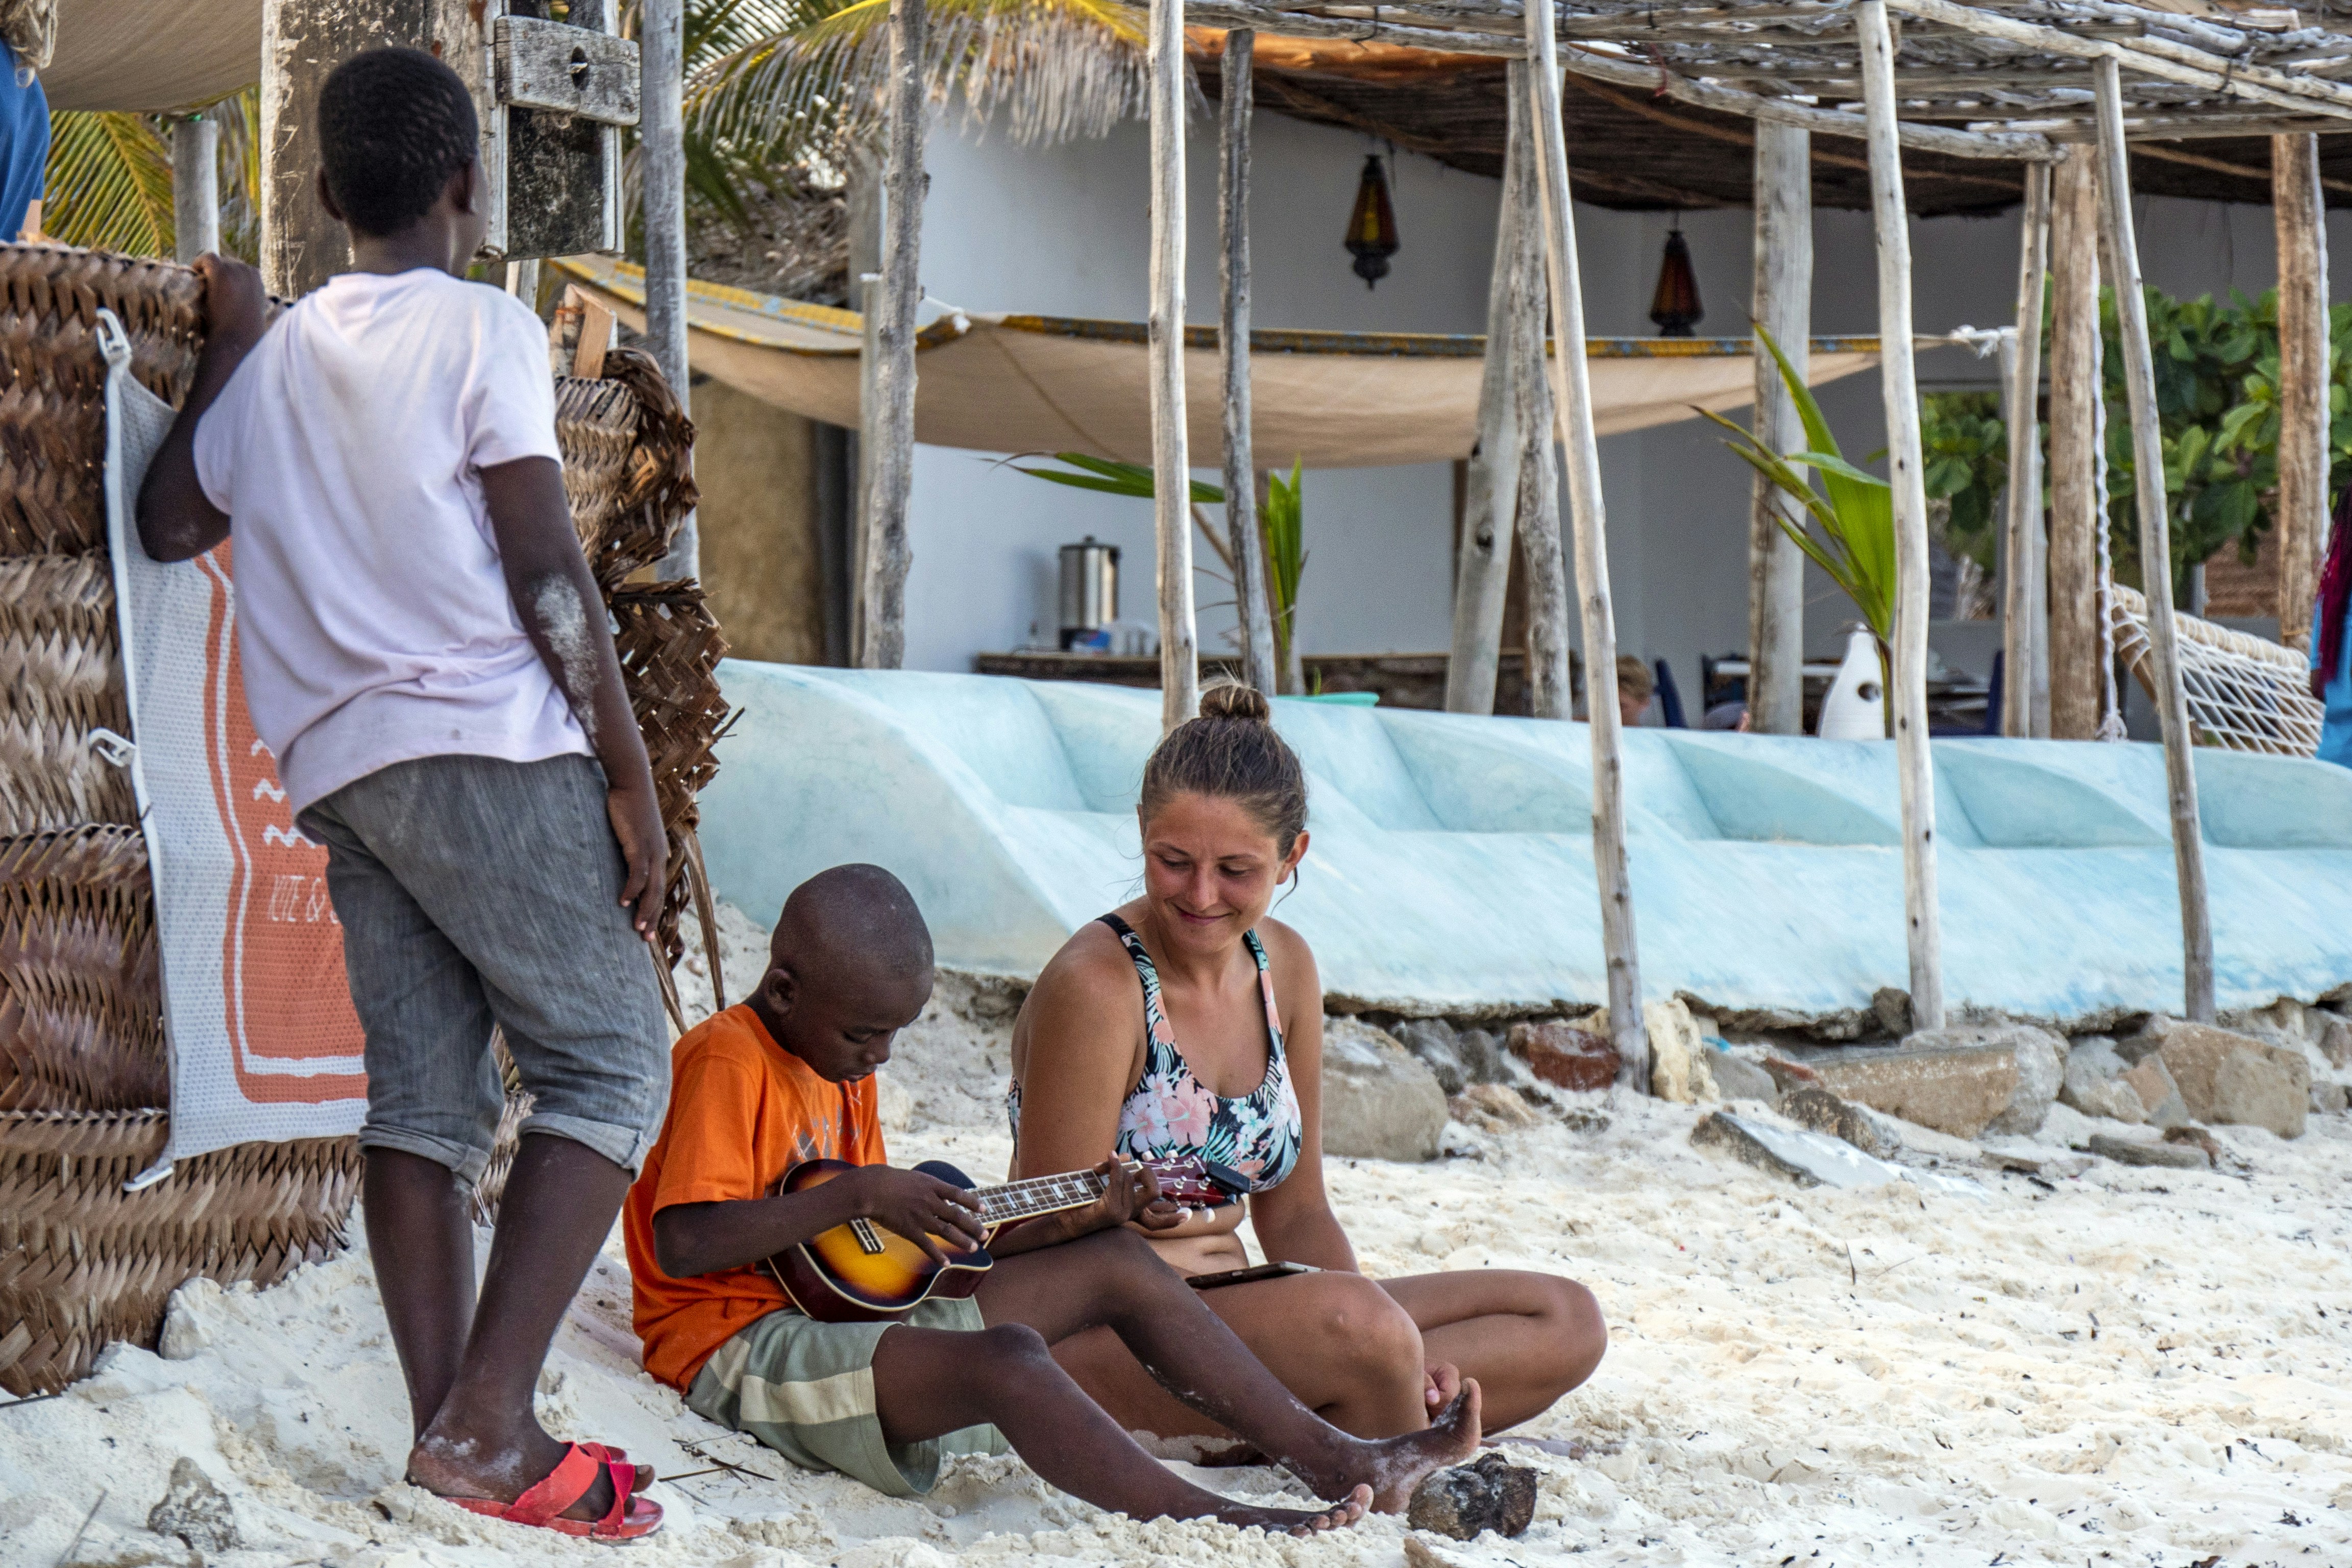 This little fellow was learning how to play some chords on the beach